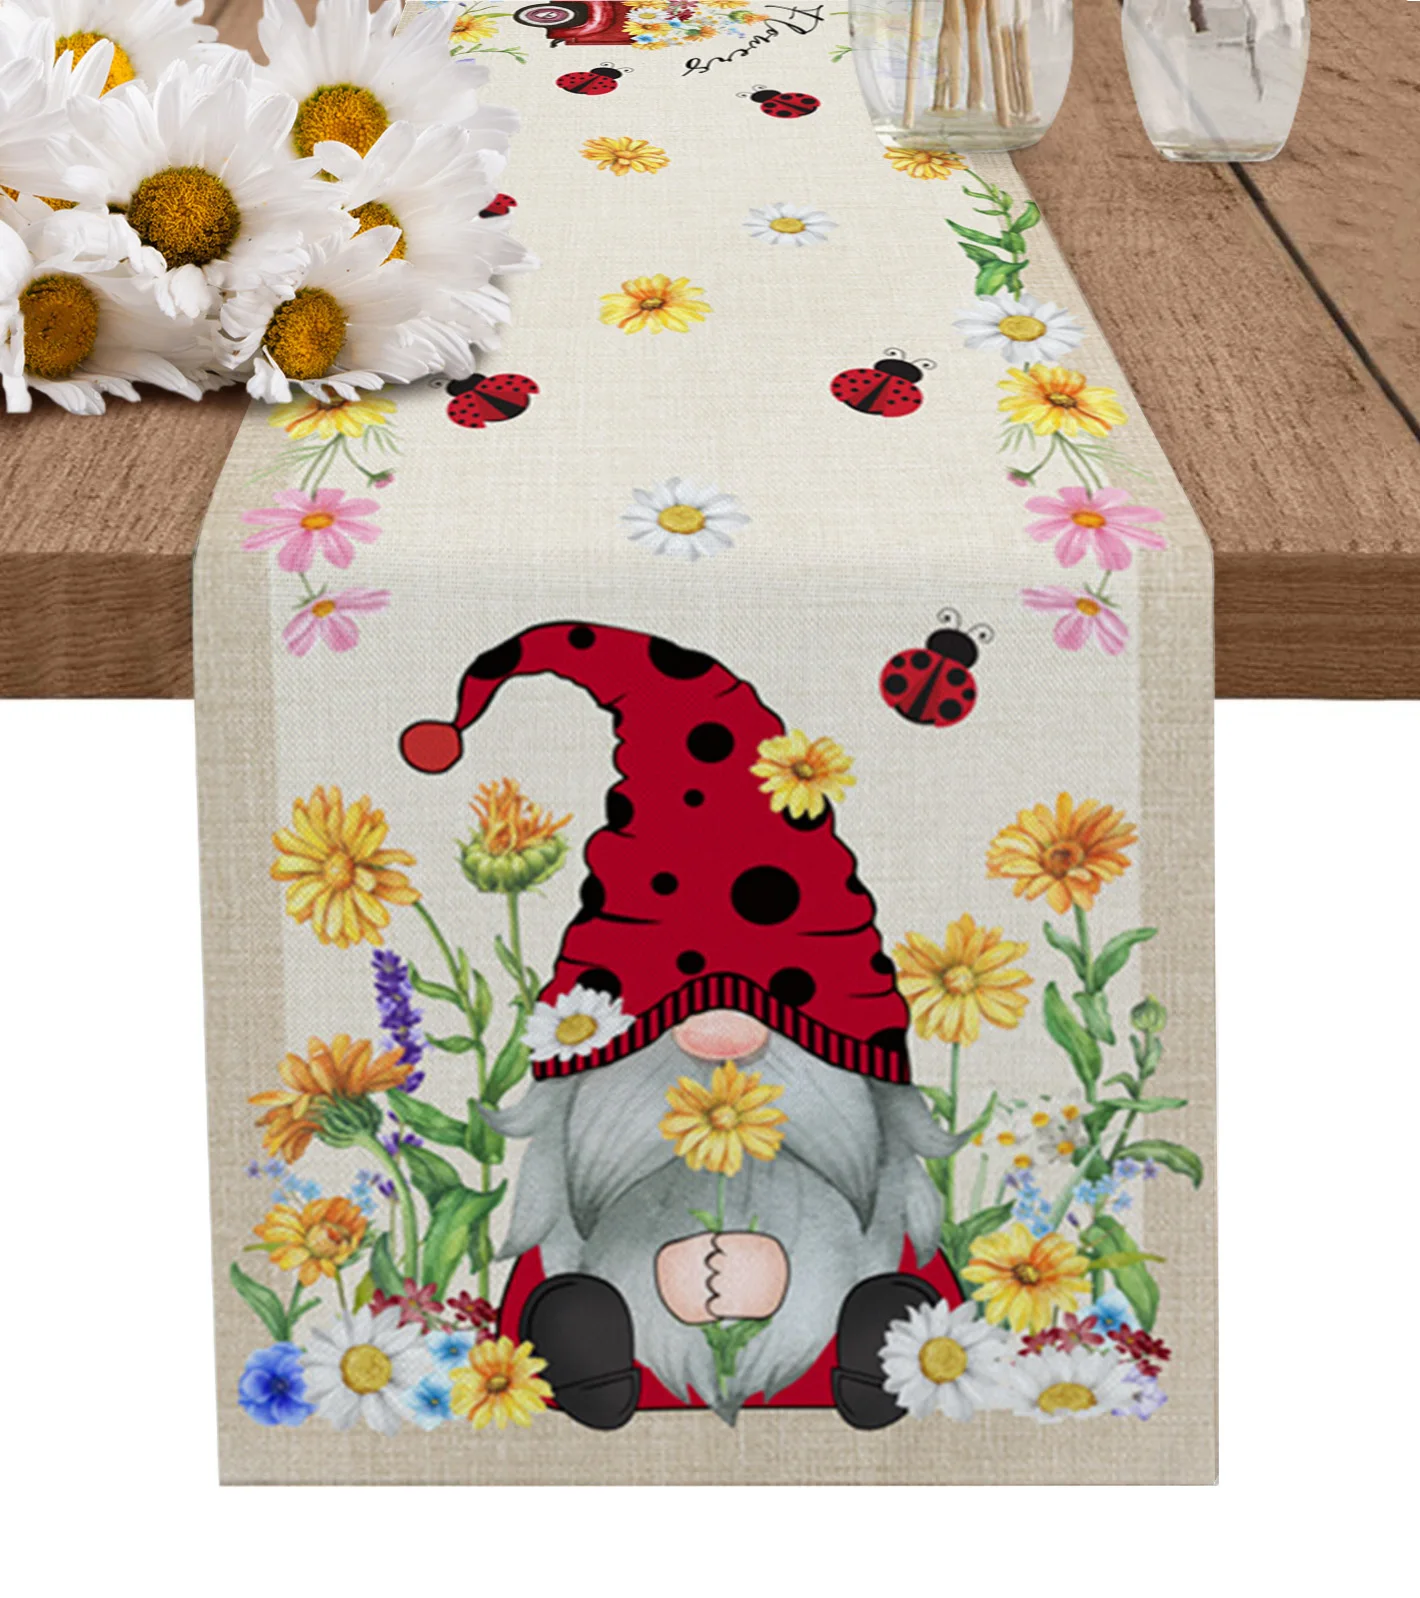 

Summer Daisy Seven Star Ladybug Gnome Table Runner luxury Kitchen Dinner Table Cover Wedding Party Decor Cotton Linen Tablecloth